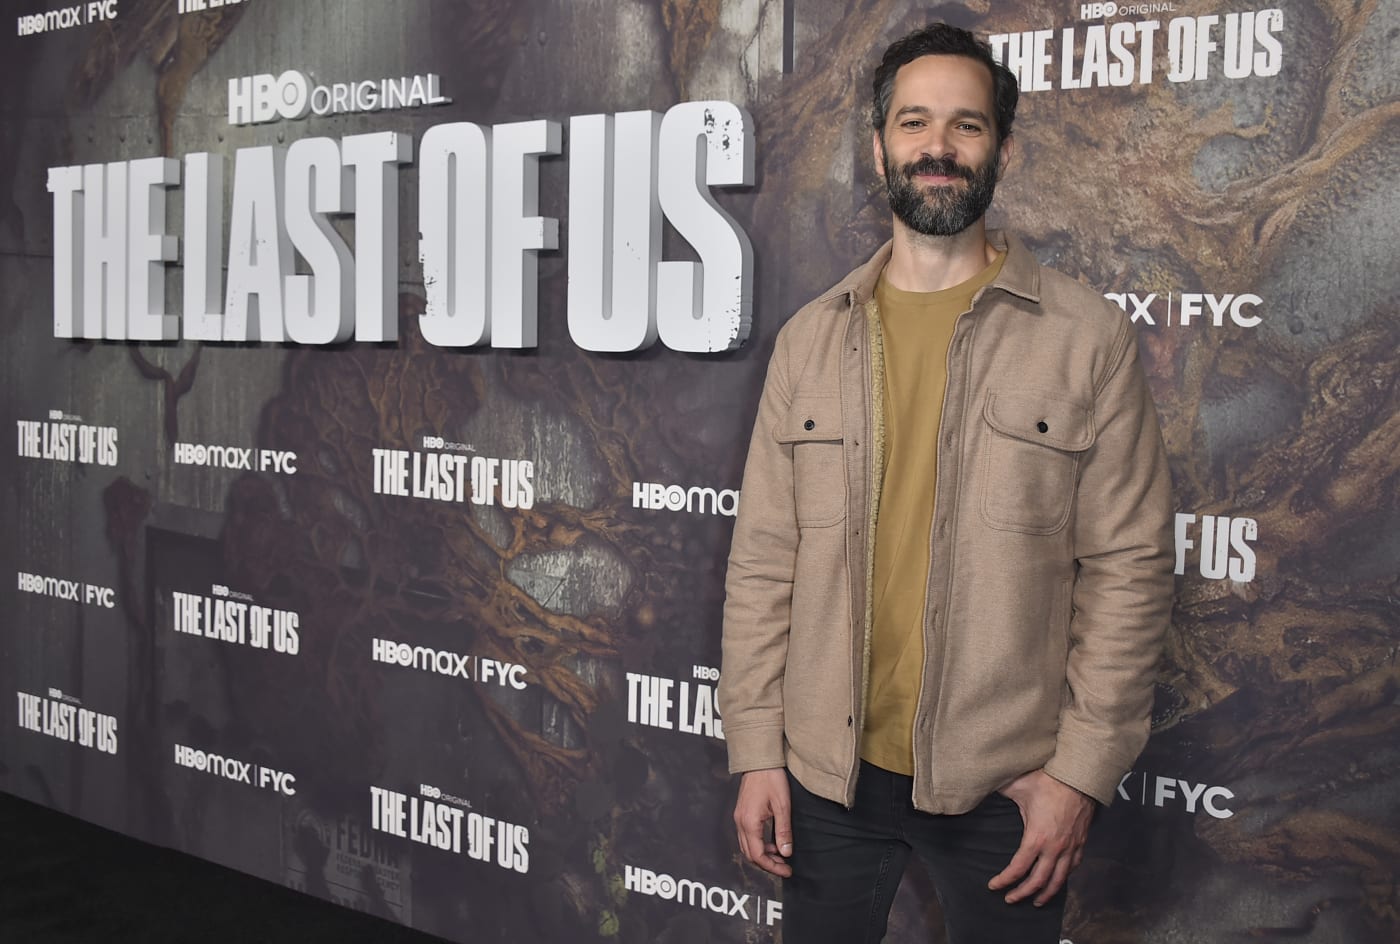 The Morning After: Sony apologizes for fabricated ‘interview’ with Last of Us studio head